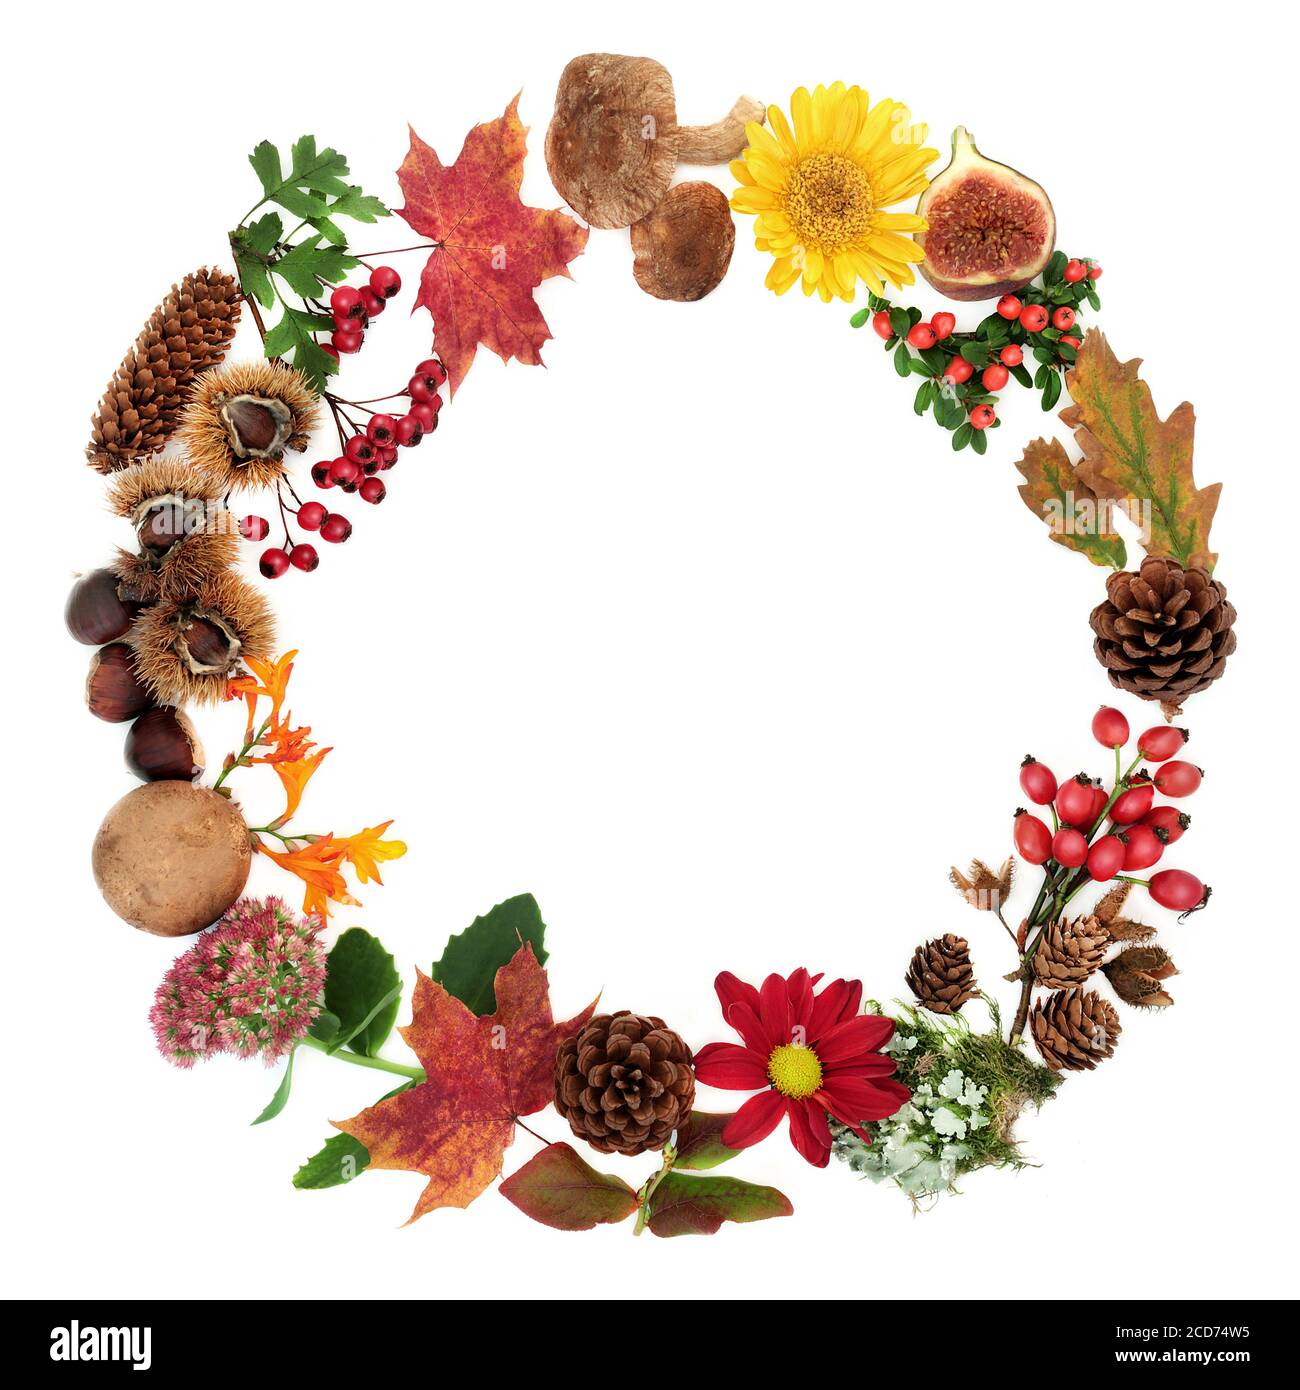 Autumn wreath composition with a variety of natural flora, fauna and food on white background with copy space. Harvest festival concept. Stock Photo